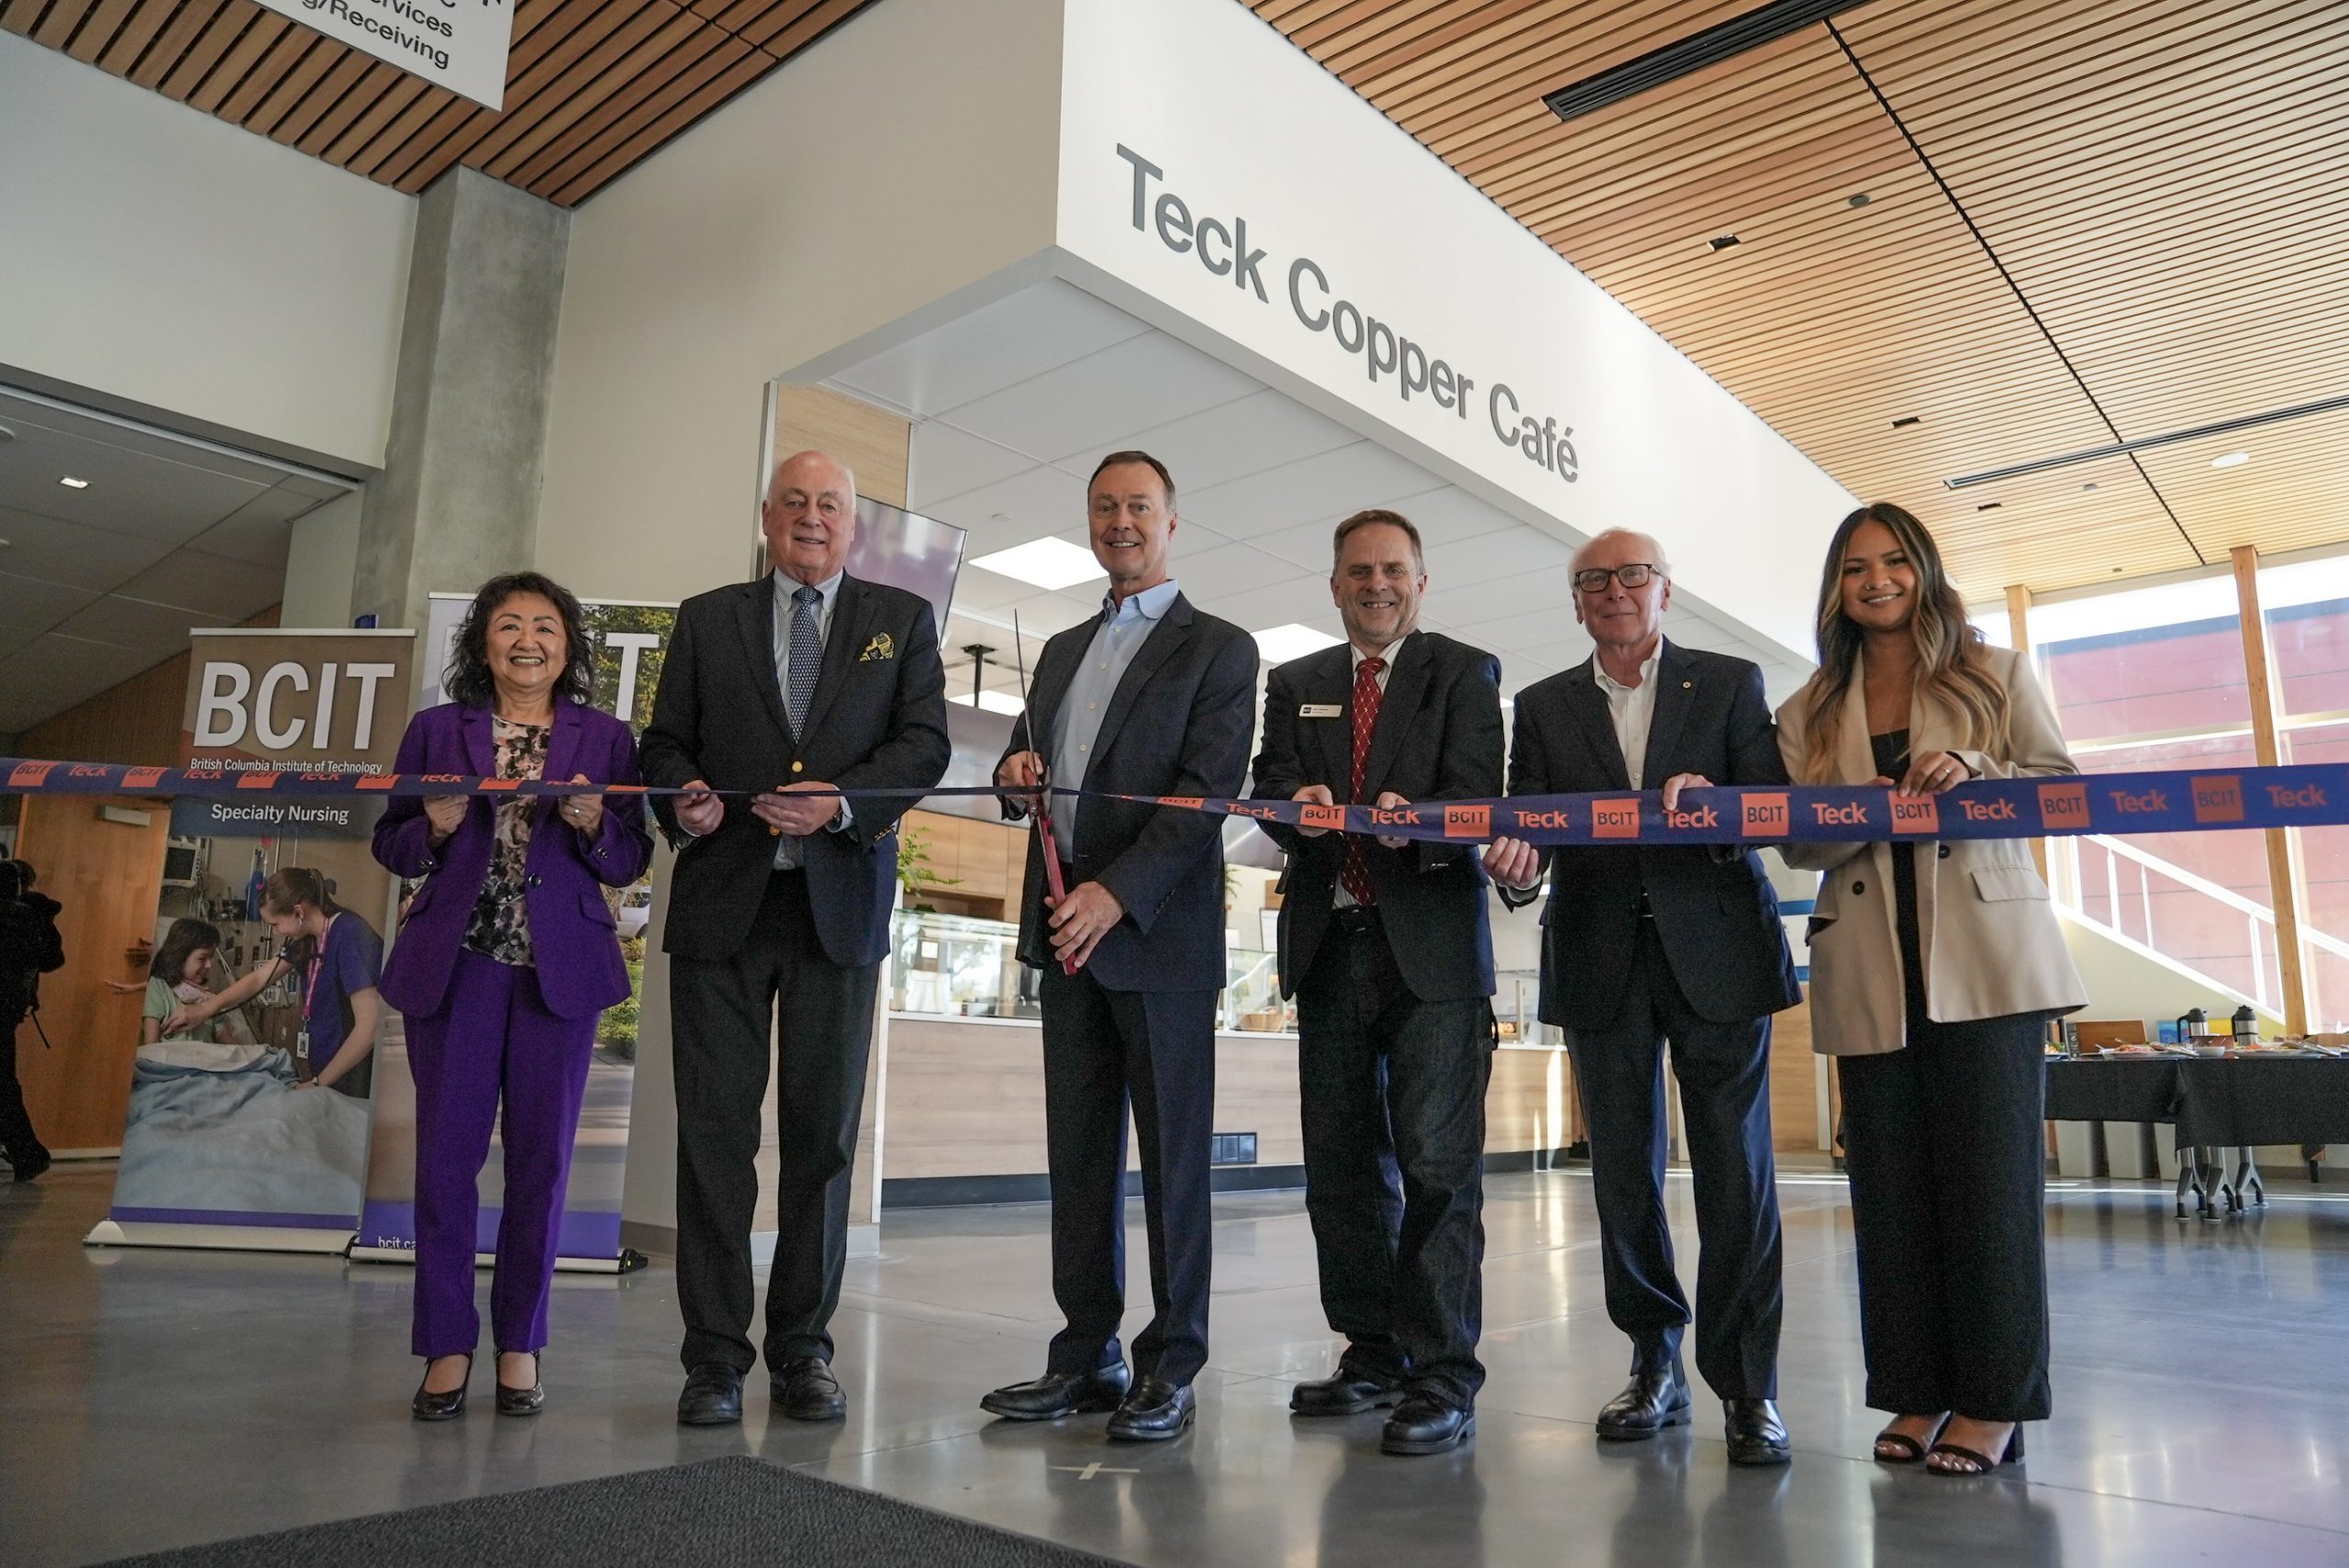 Ribbon cutting during the BCIT Teck Celebration event.